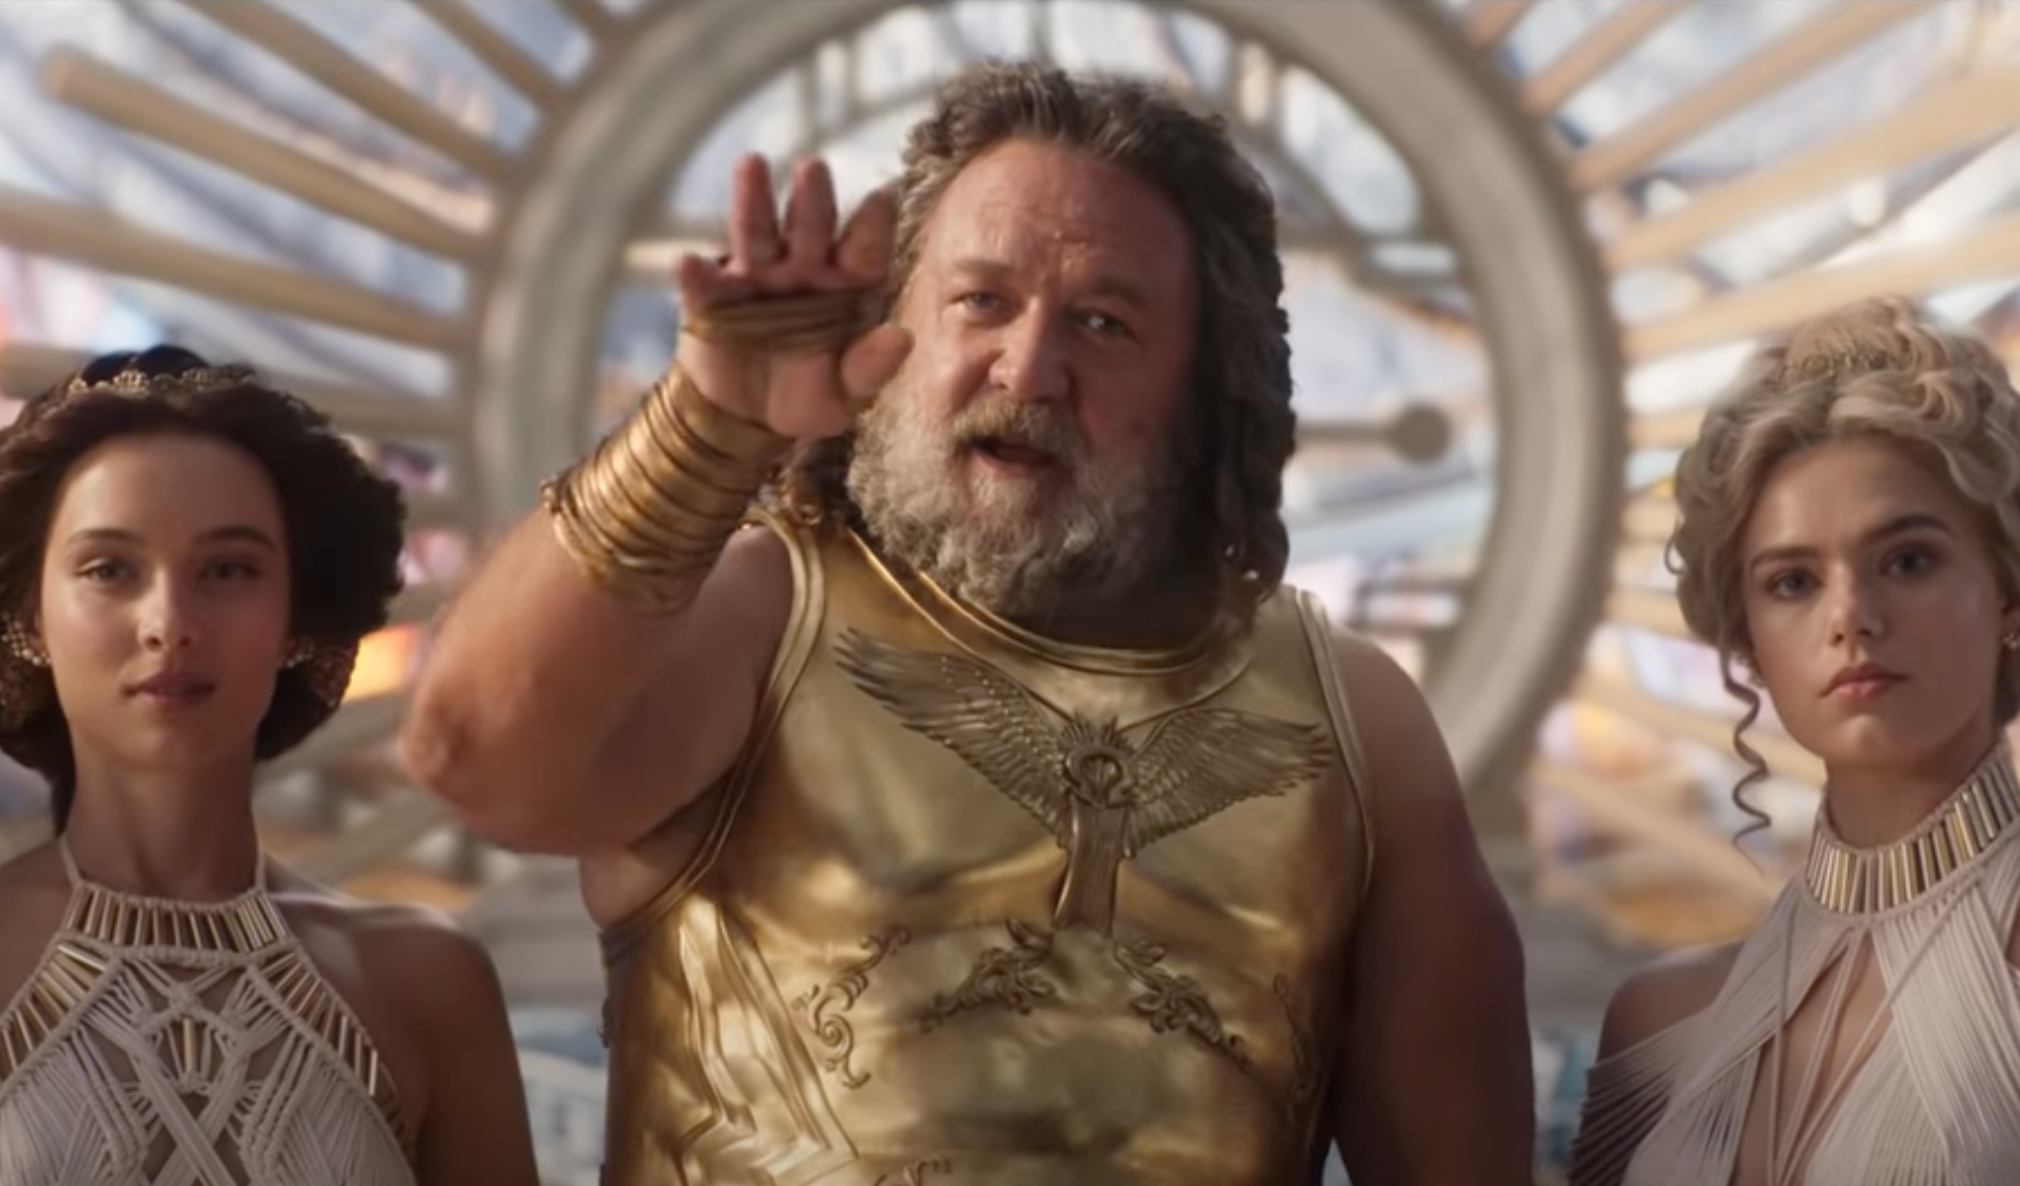 Thor: Love and Thunder features a whole pantheon of cameos